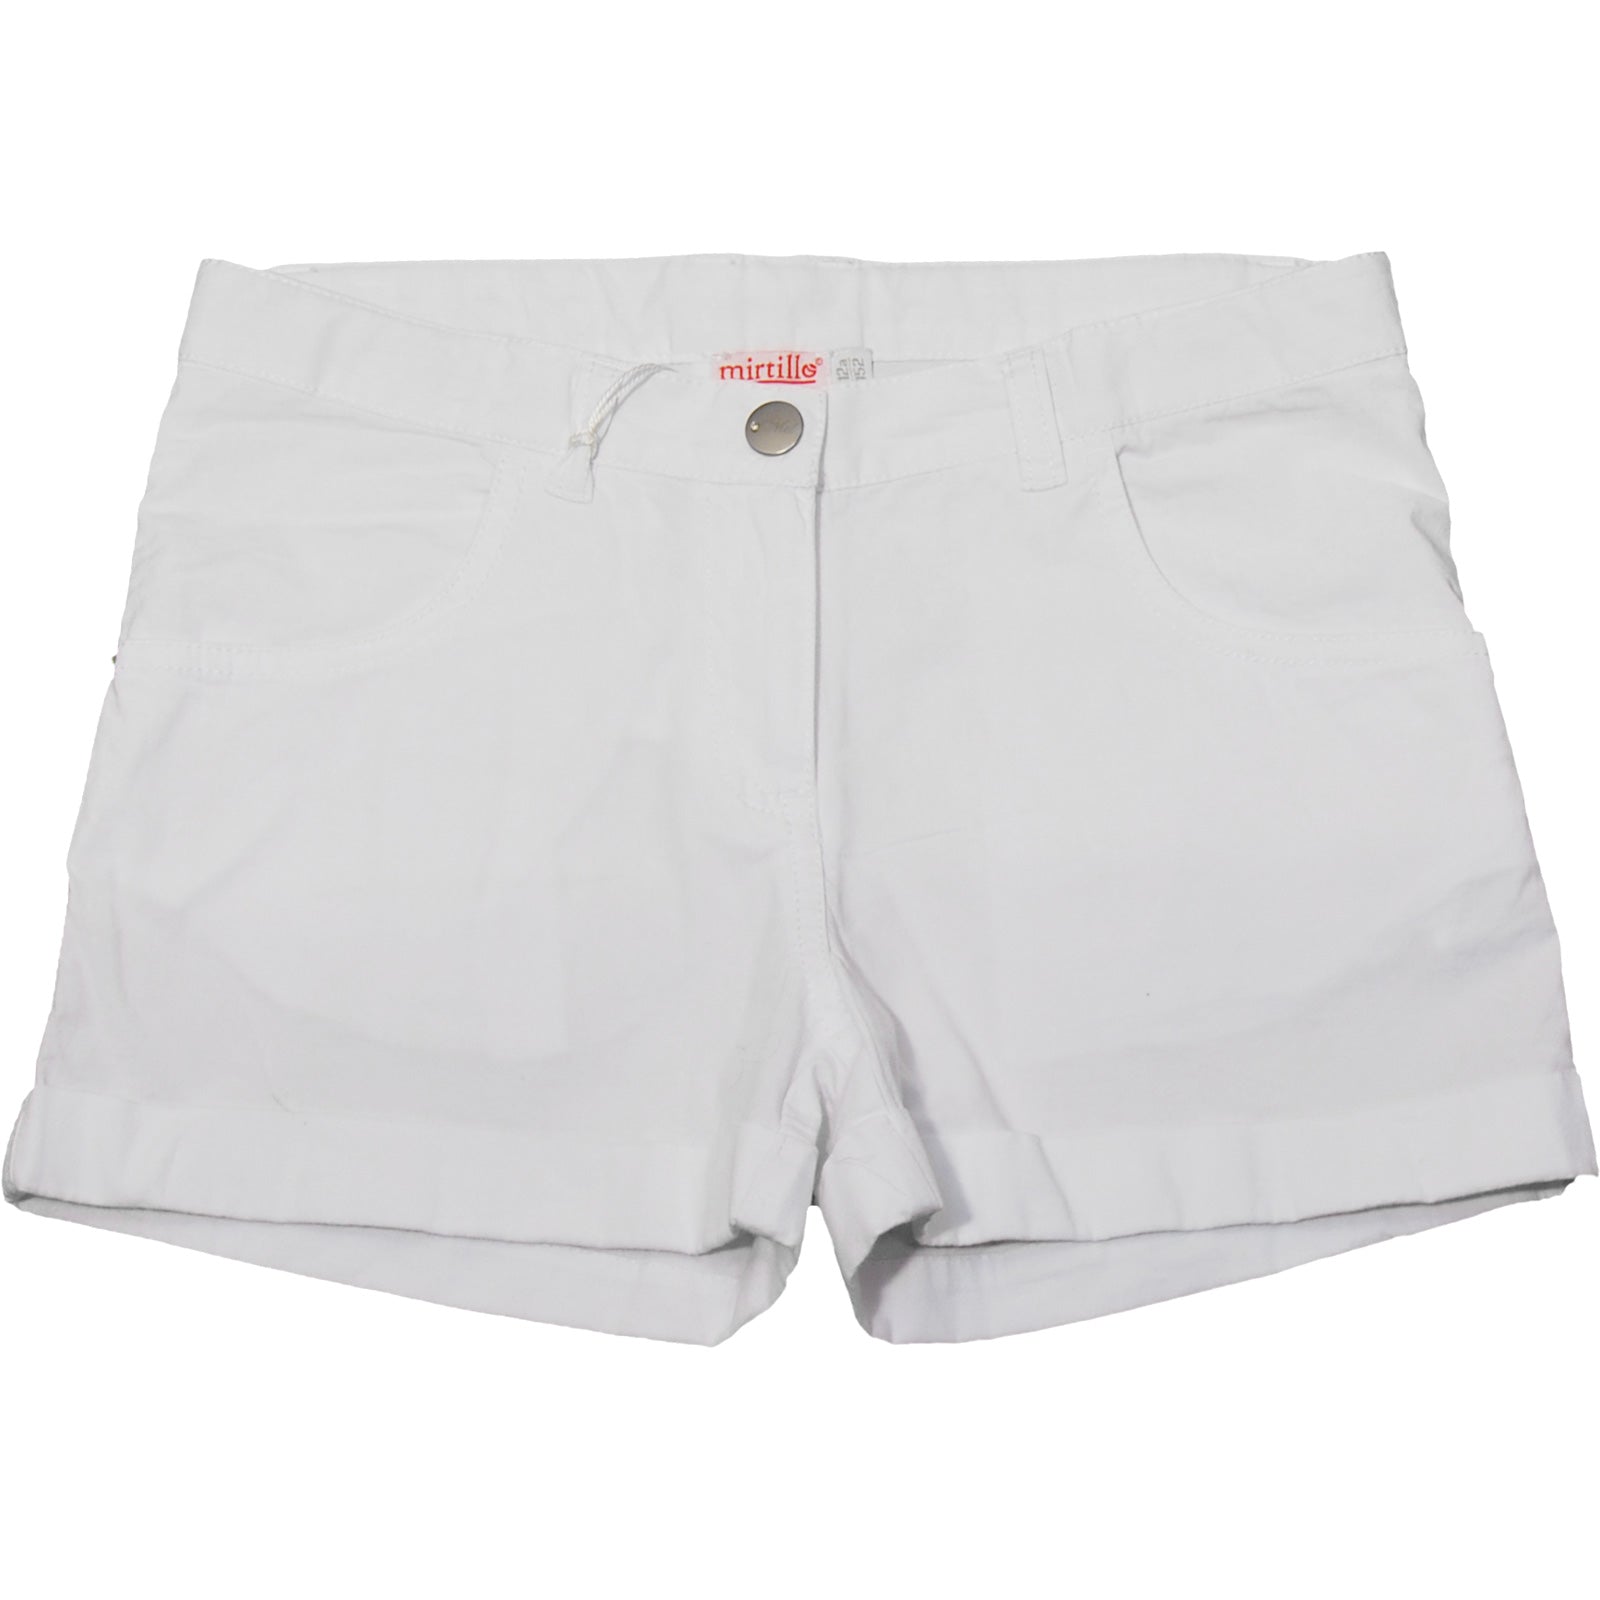 
  Cotton poplin shorts from the girls' clothing line Mirtillo, 4 pockets, embroidery on the back...